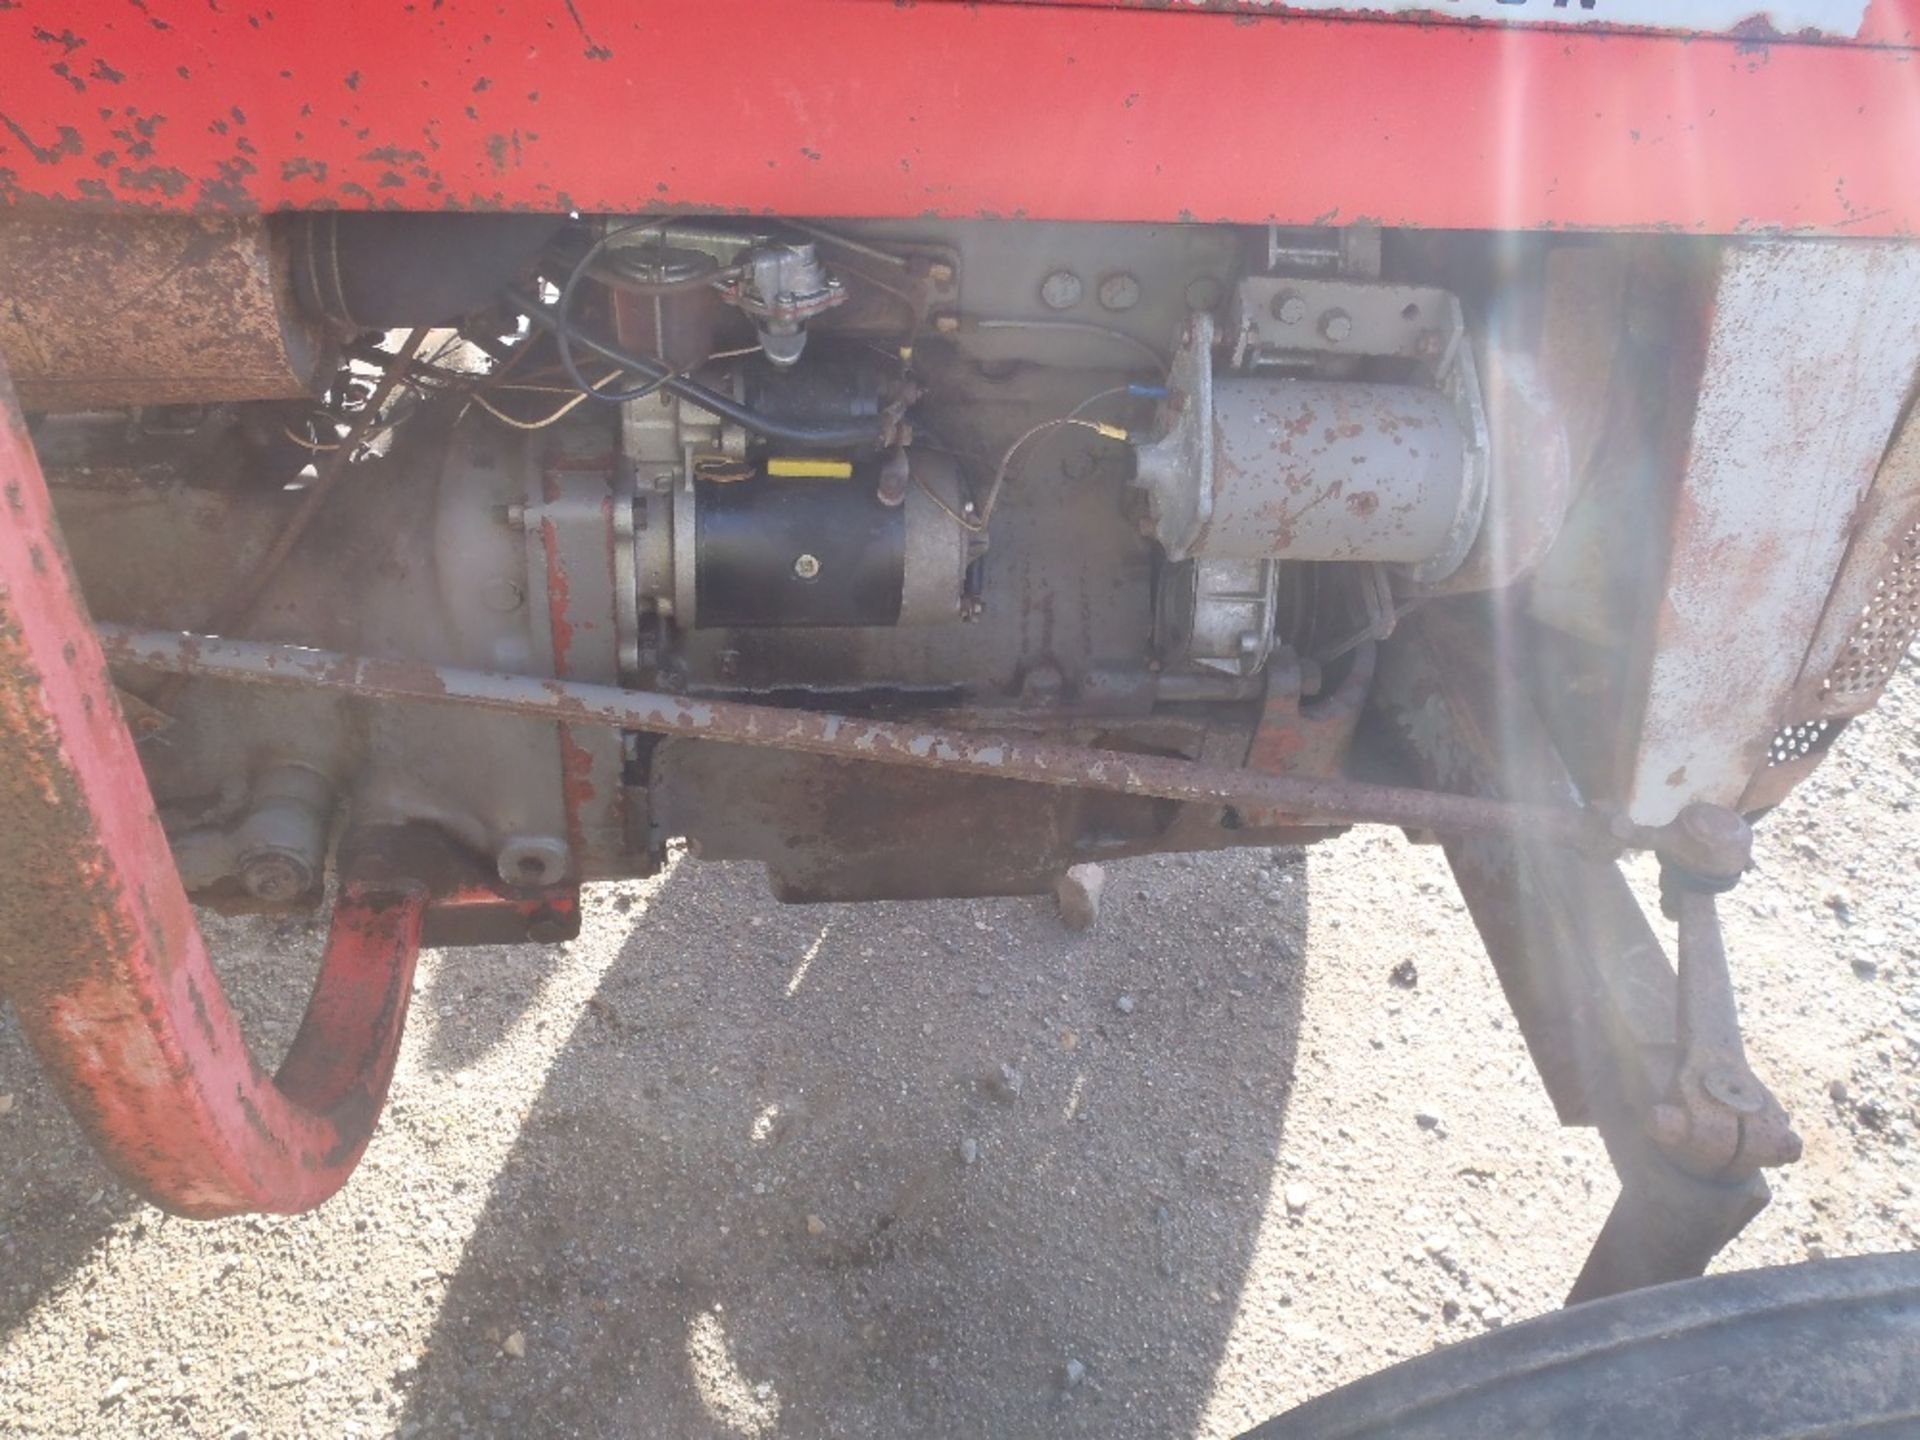 Massey Ferguson 135 Tractor. Straight Front Axle, Dry Air Filter, Heavy Casting Reg. No. DDE 905L - Image 4 of 7